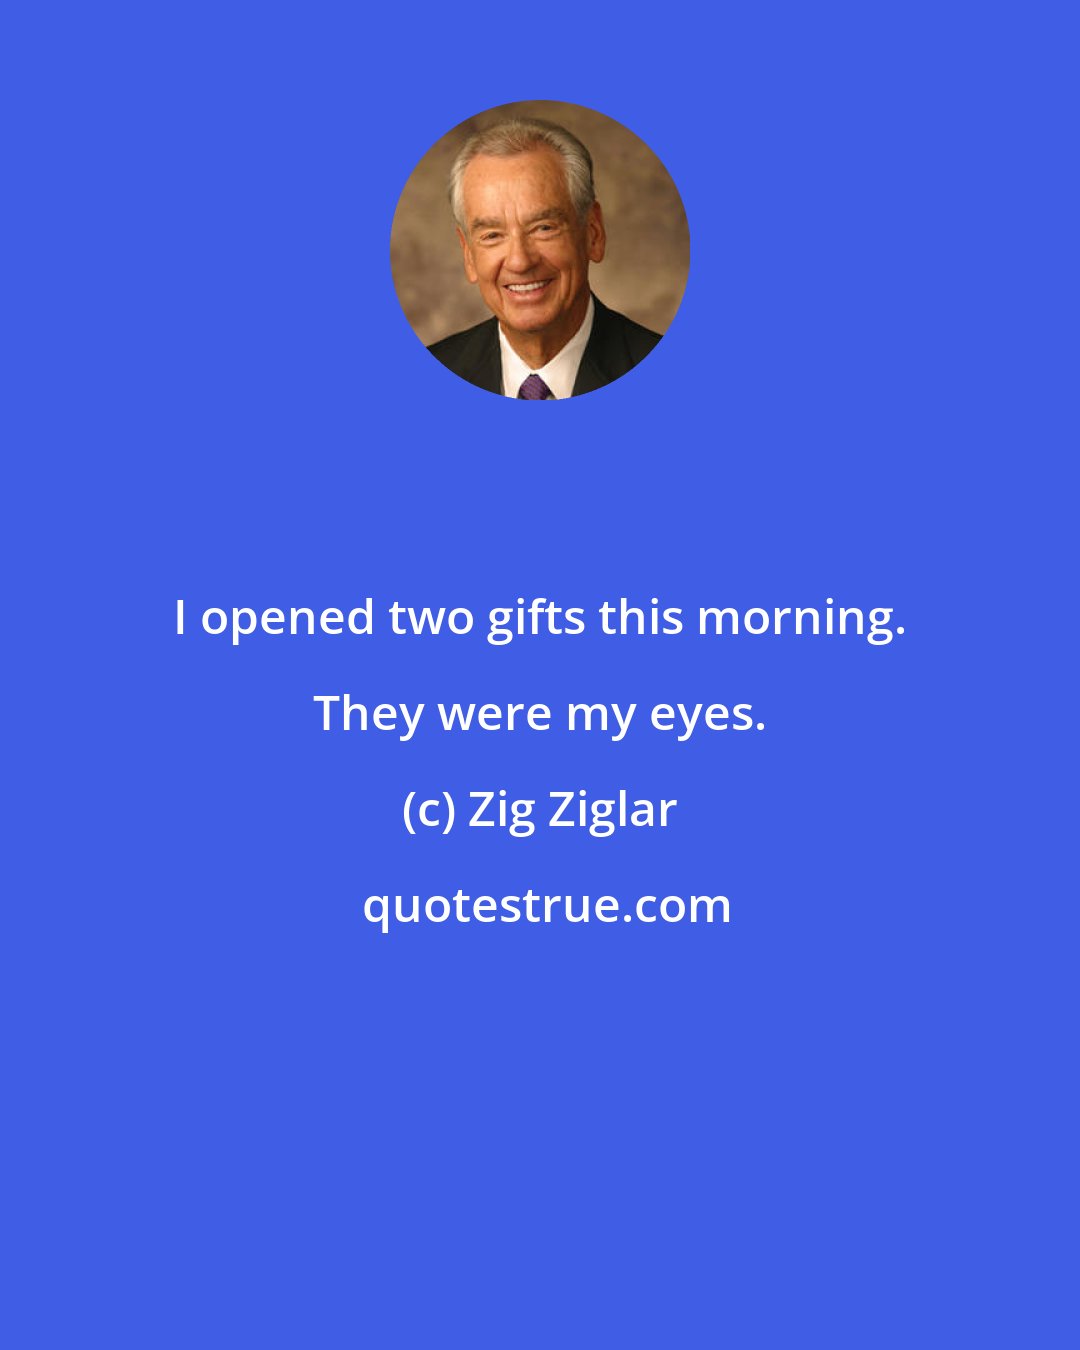 Zig Ziglar: I opened two gifts this morning. They were my eyes.